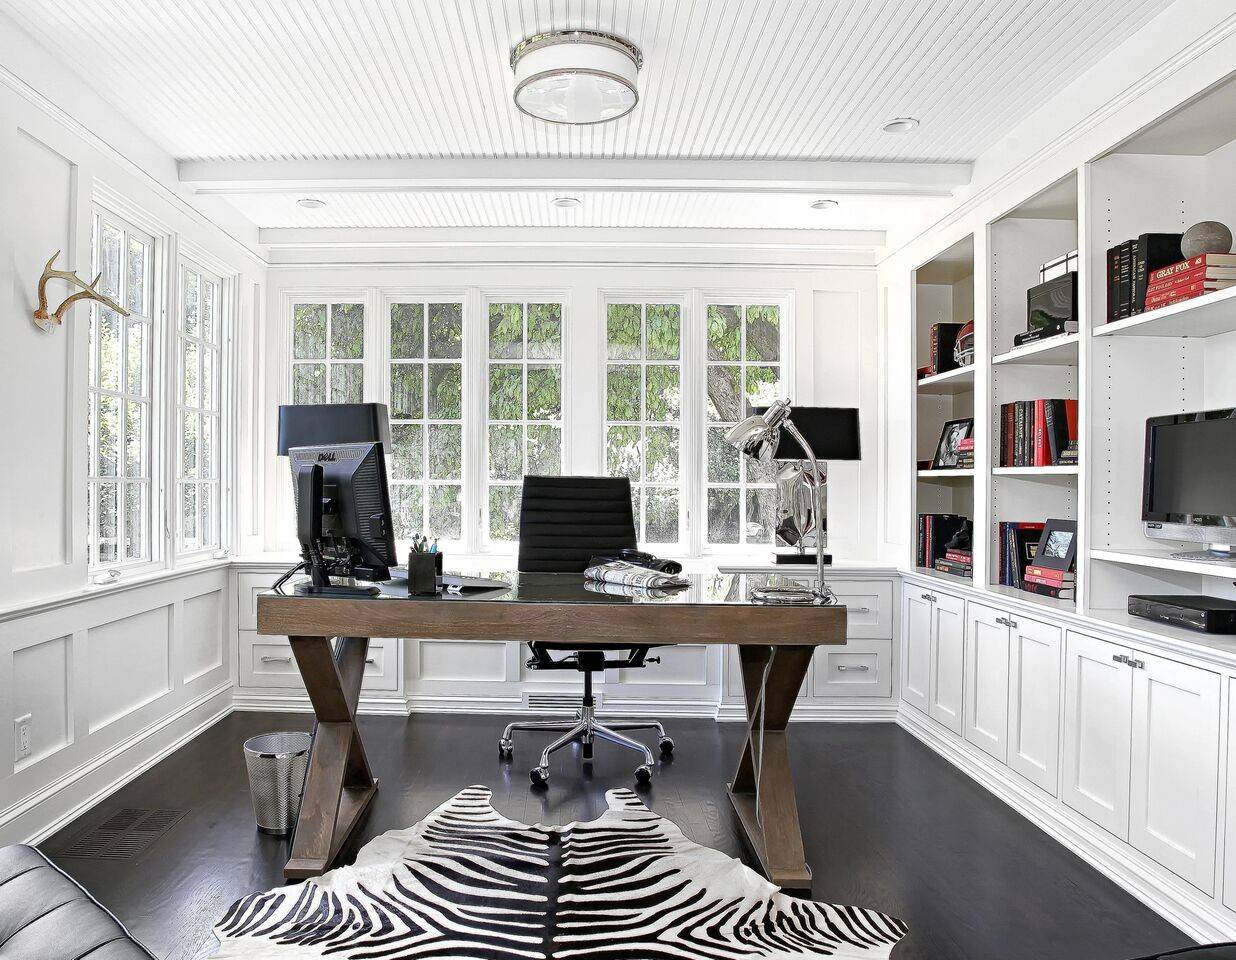 How to Design a Modern Home Office